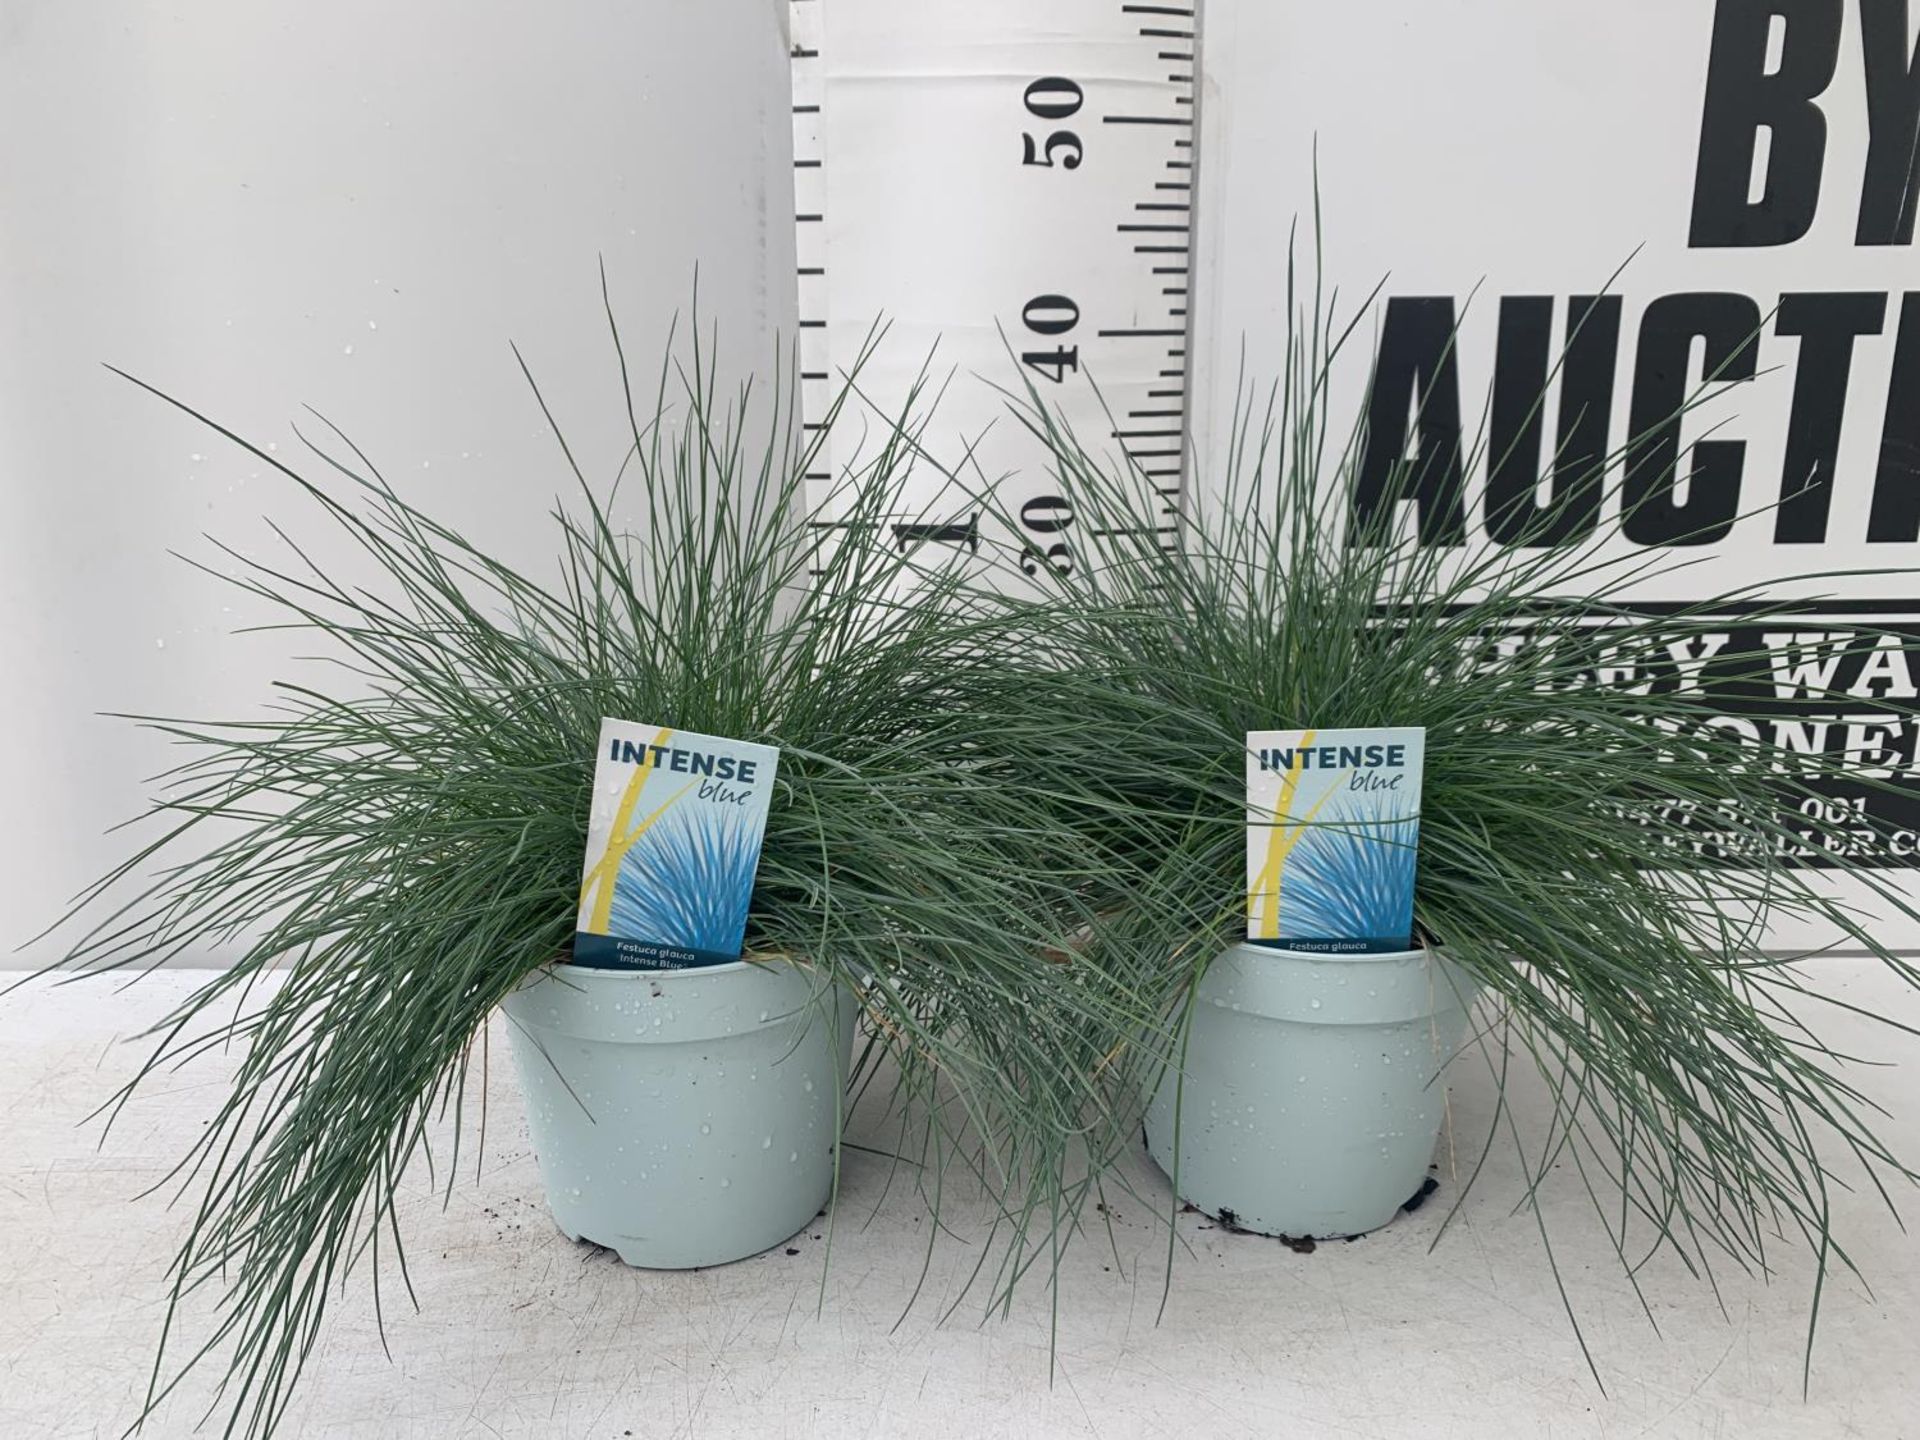 TWO FESTUCA GLAUCA 'INTENSE BLUE' ORNAMENTAL GRASSES IN 2 LTR POTS APPROX 40CM IN HEIGHT PLUS VAT TO